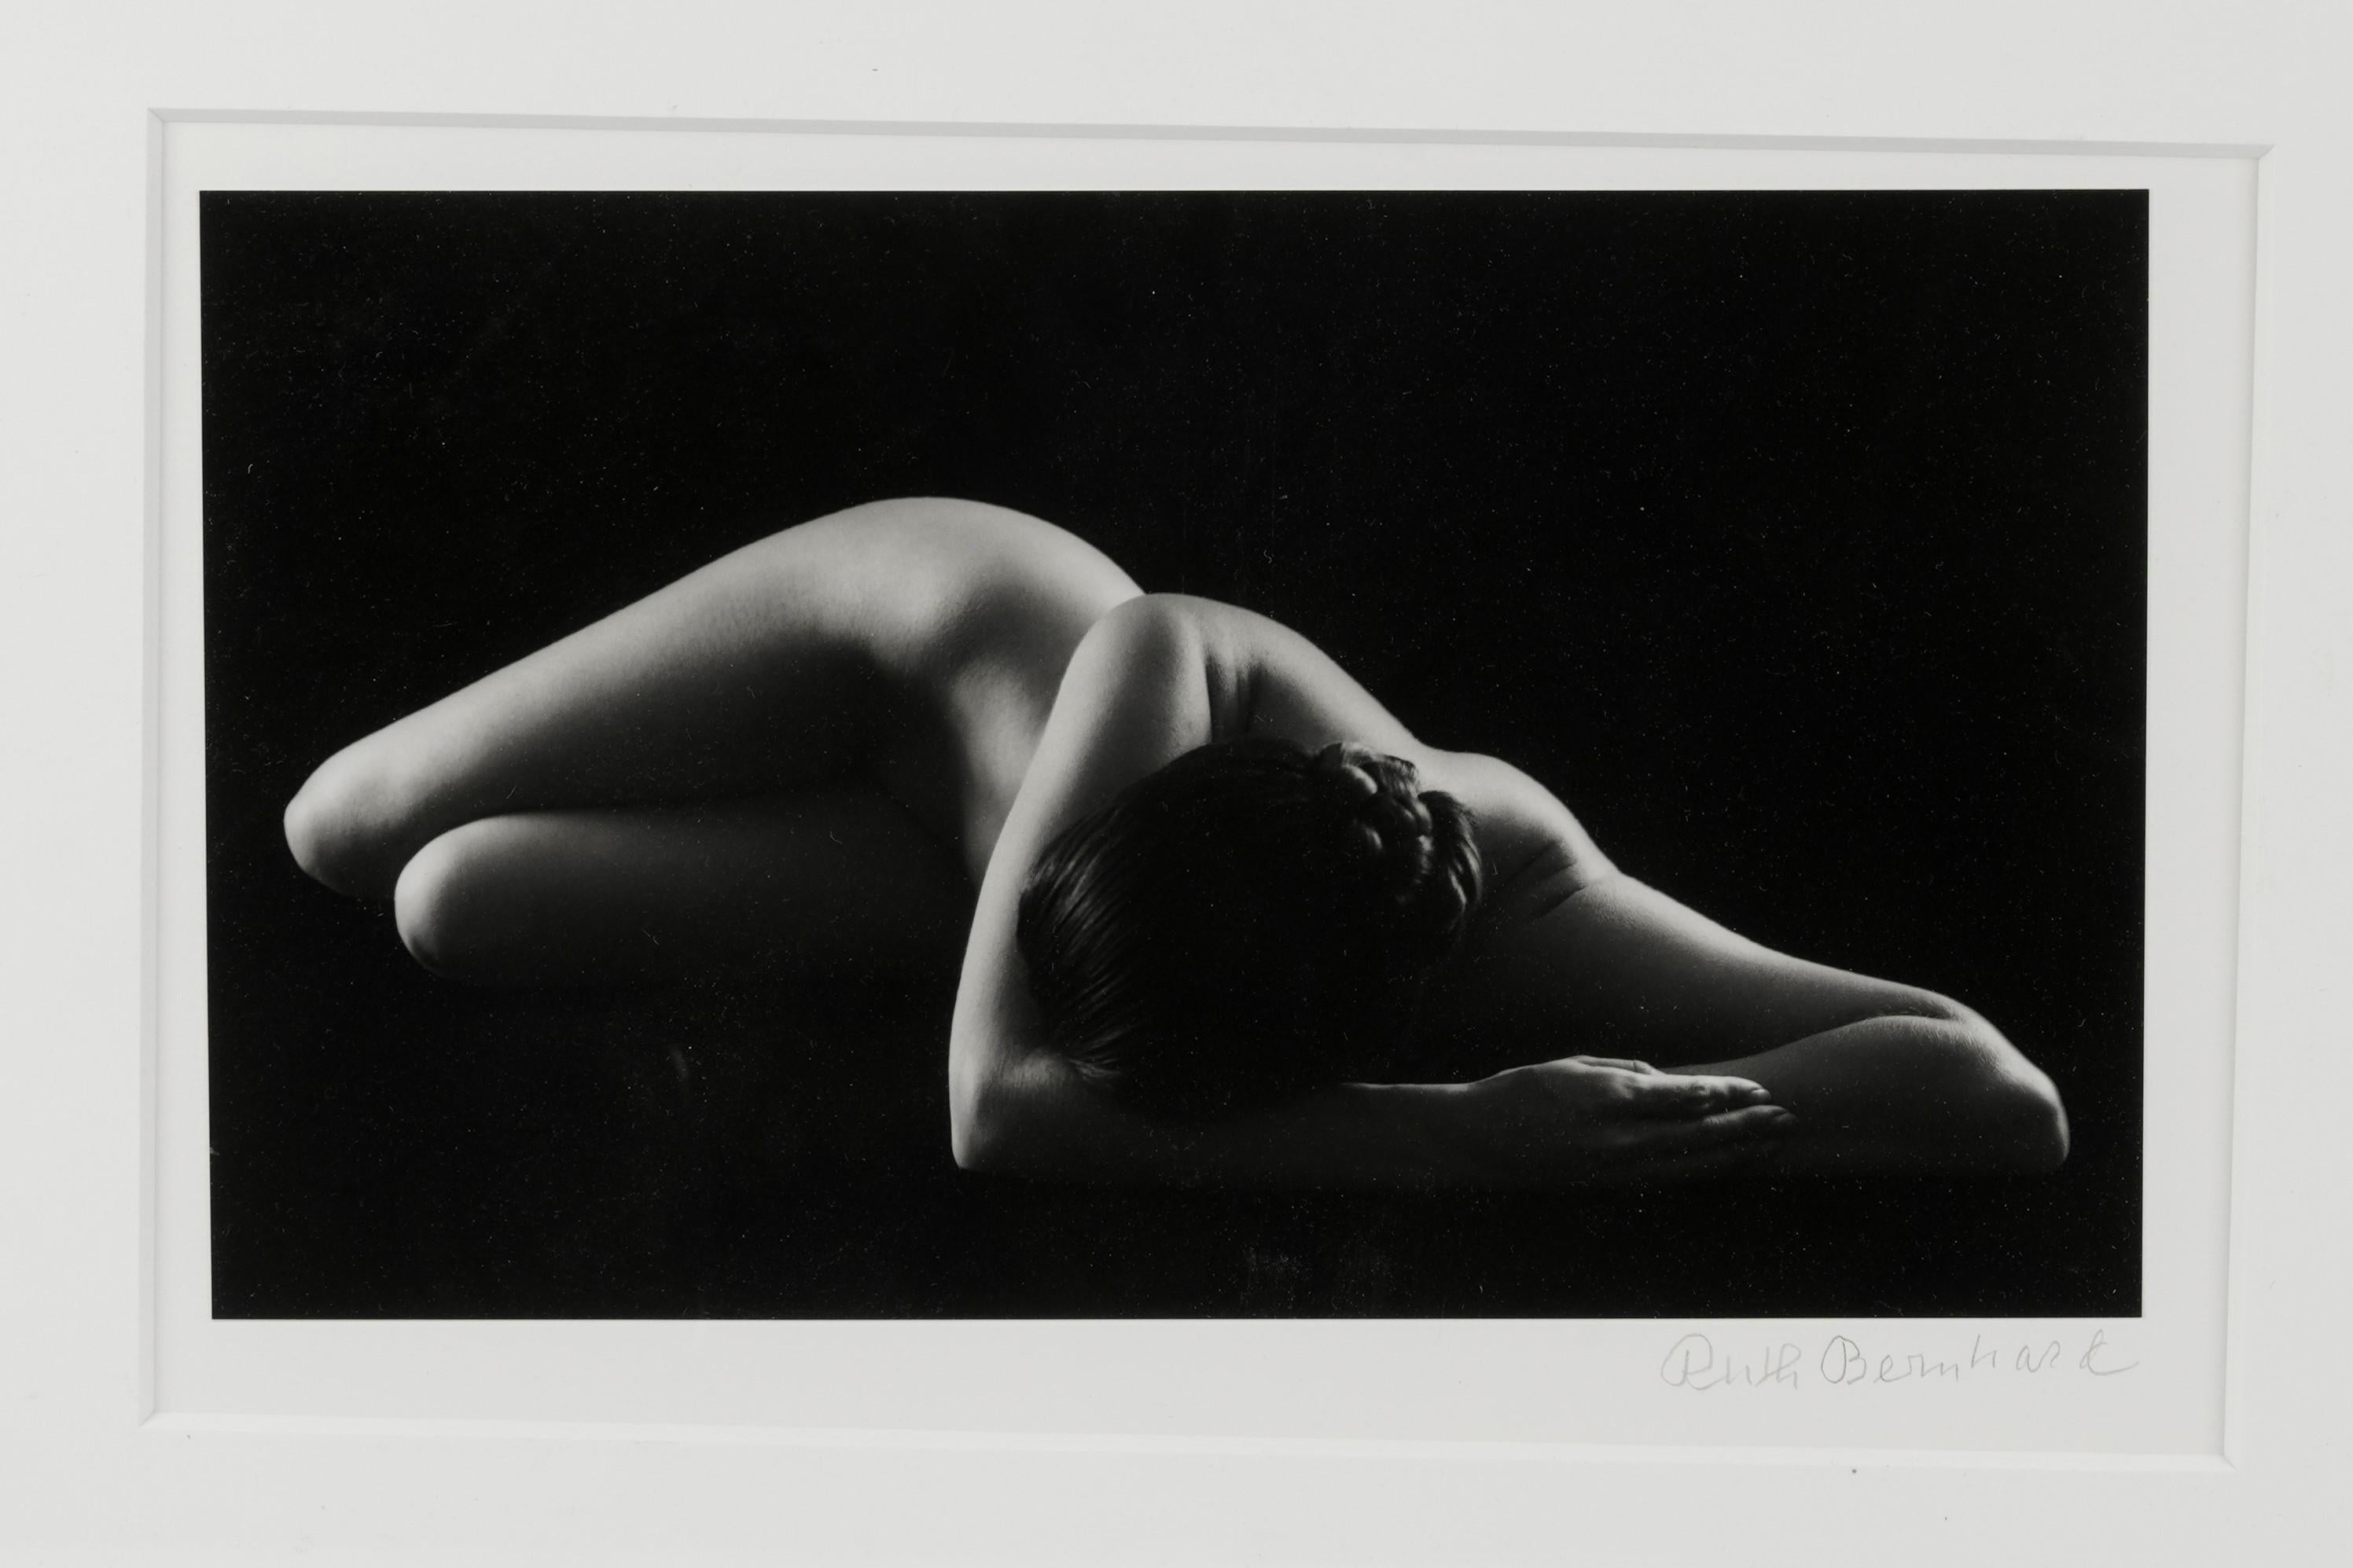 American Ruth Bernhard Signed Gelatin Silver Photograph Print Perspective II, 1967 For Sale